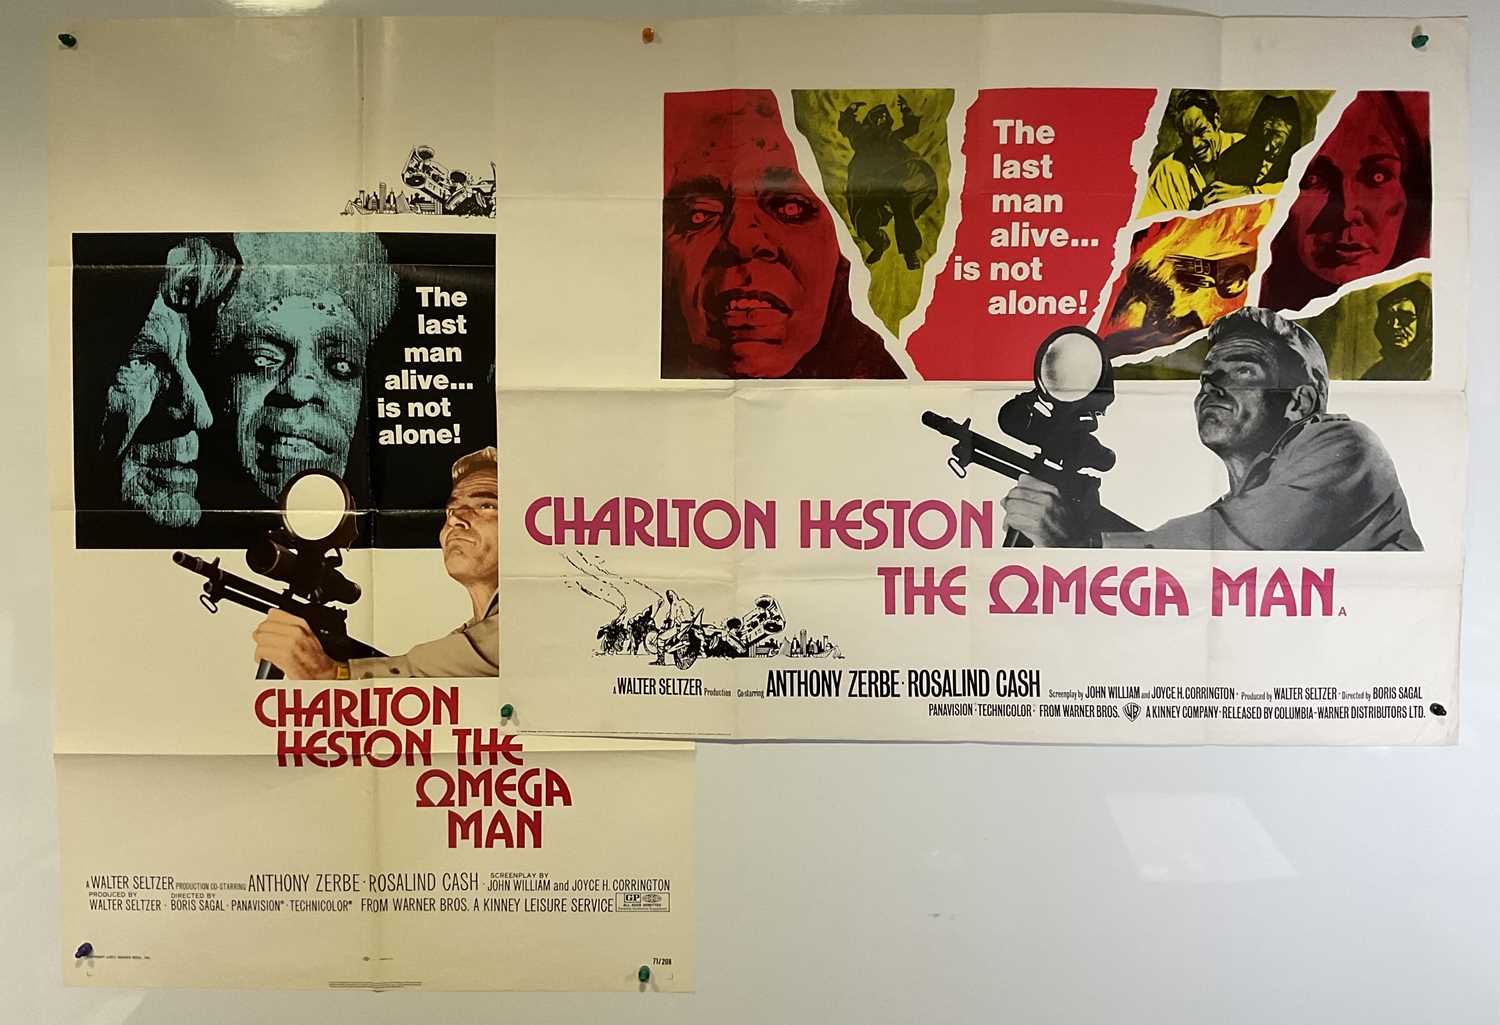 THE OMEGA MAN (1971) A US one sheet and UK Quad film poster for the Charlton Heston Horror